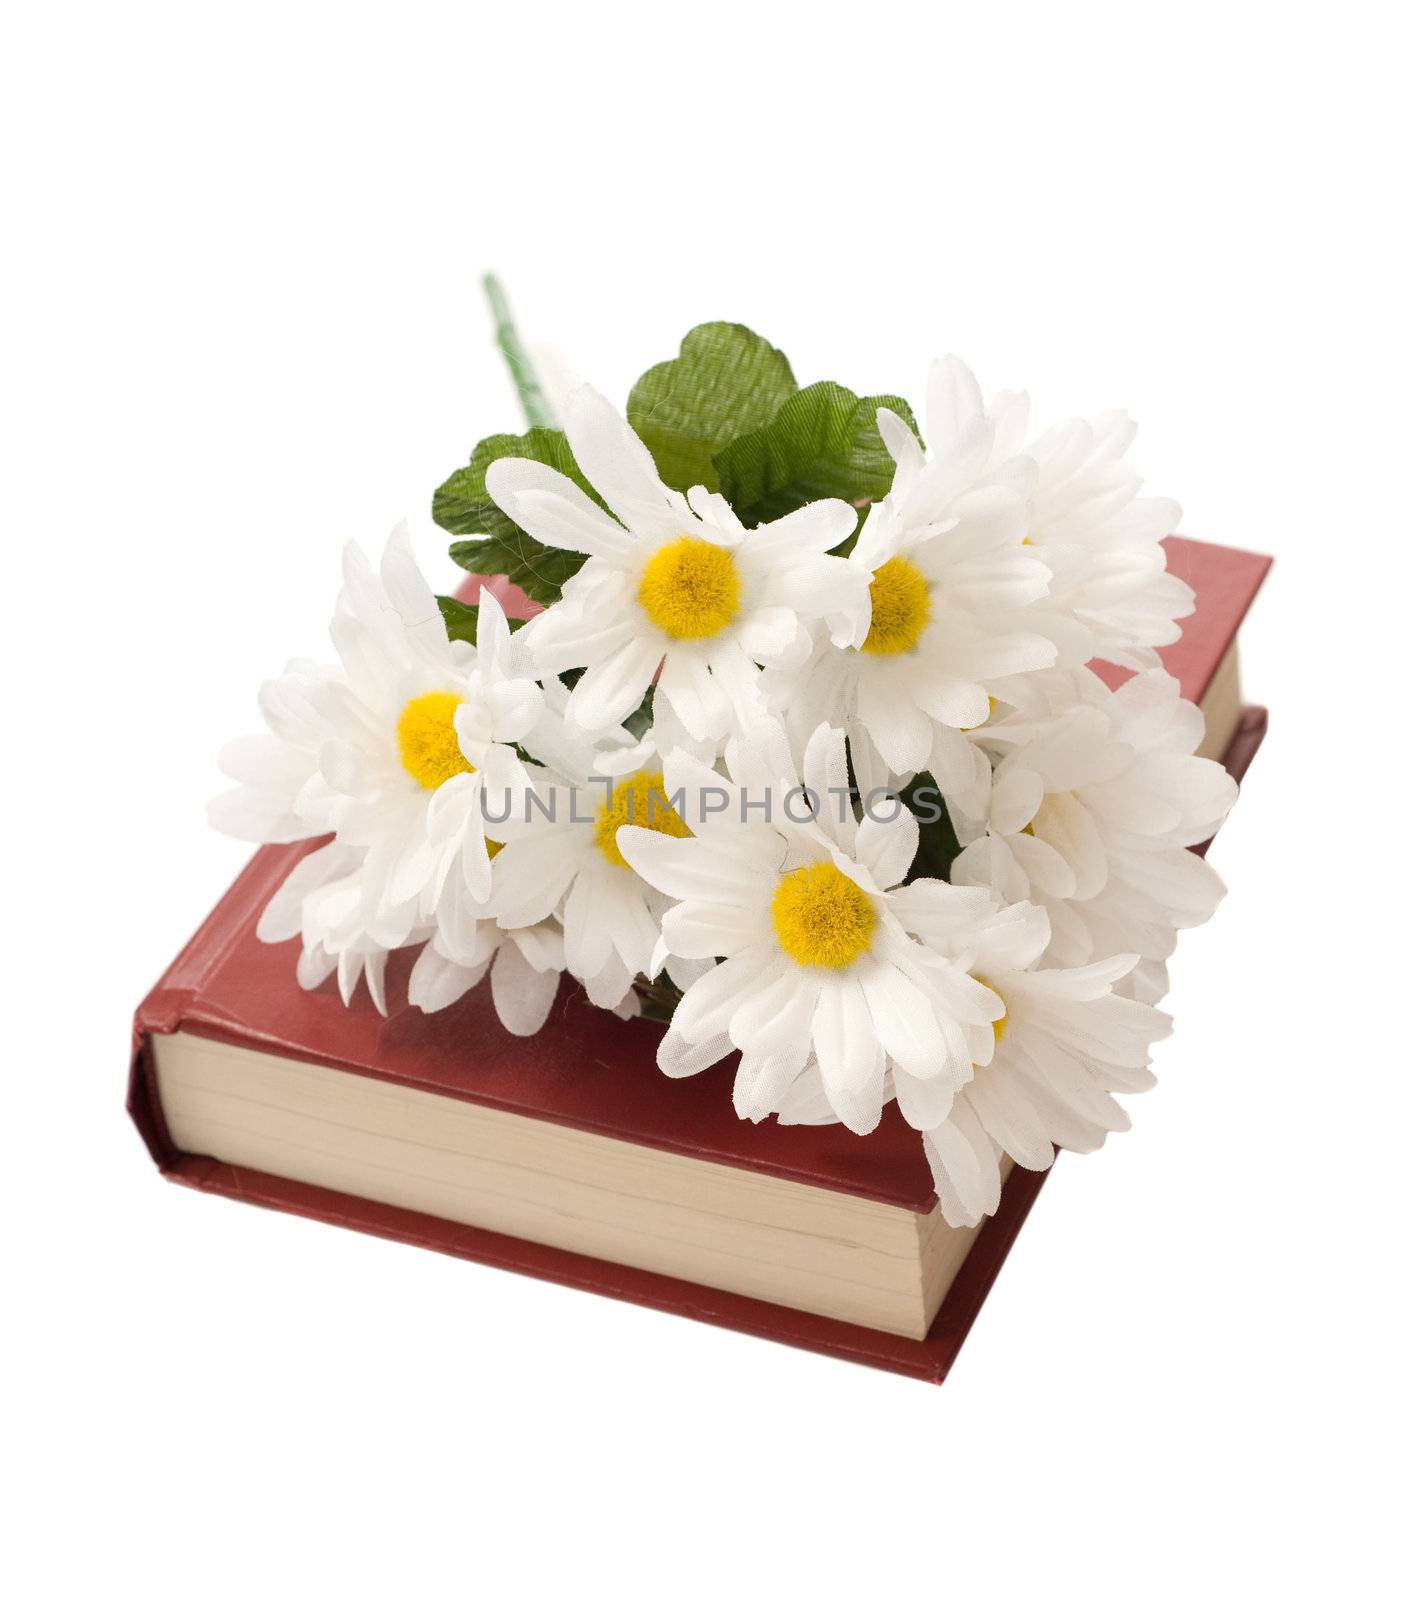 A closed book with some artificial daisies on top, isolated against a white background